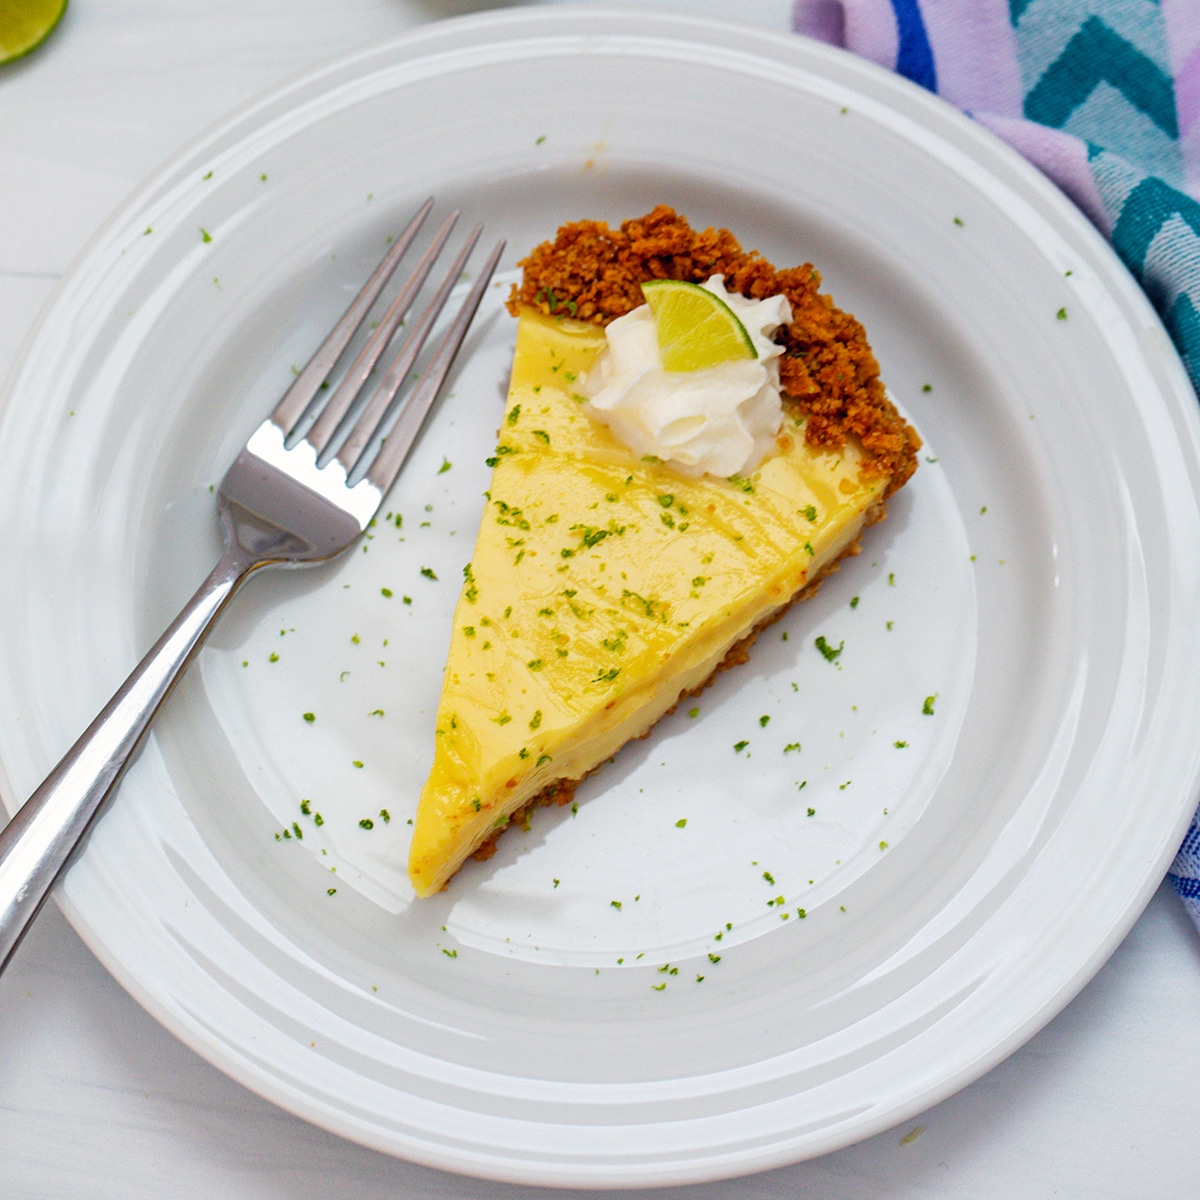 Overhead view of a slice of key lime pie with graham cracker crust and whipped cream on a white plate with a fork